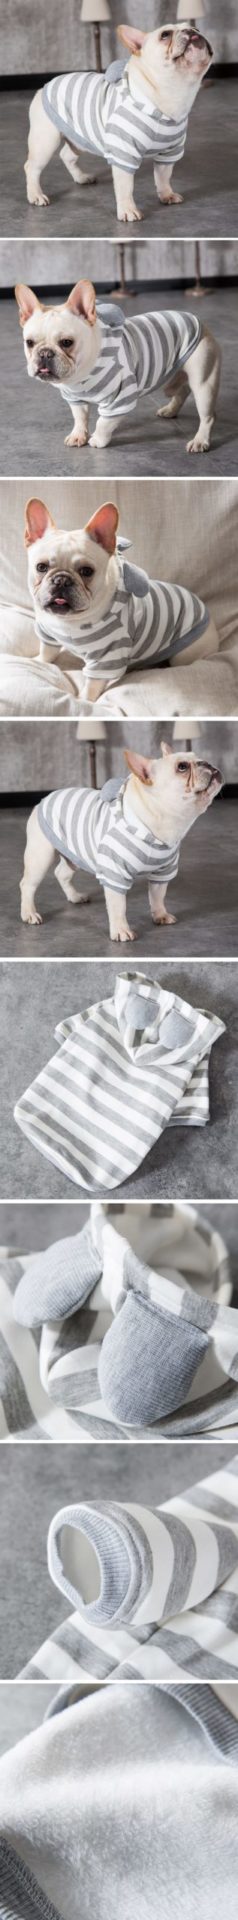 Warm Pet Dog Autumn Winter Clothes for Dog Striped Costume French Bulldog Hoodies Puppy Clothing Pug Dog Clothes for Small Dogs